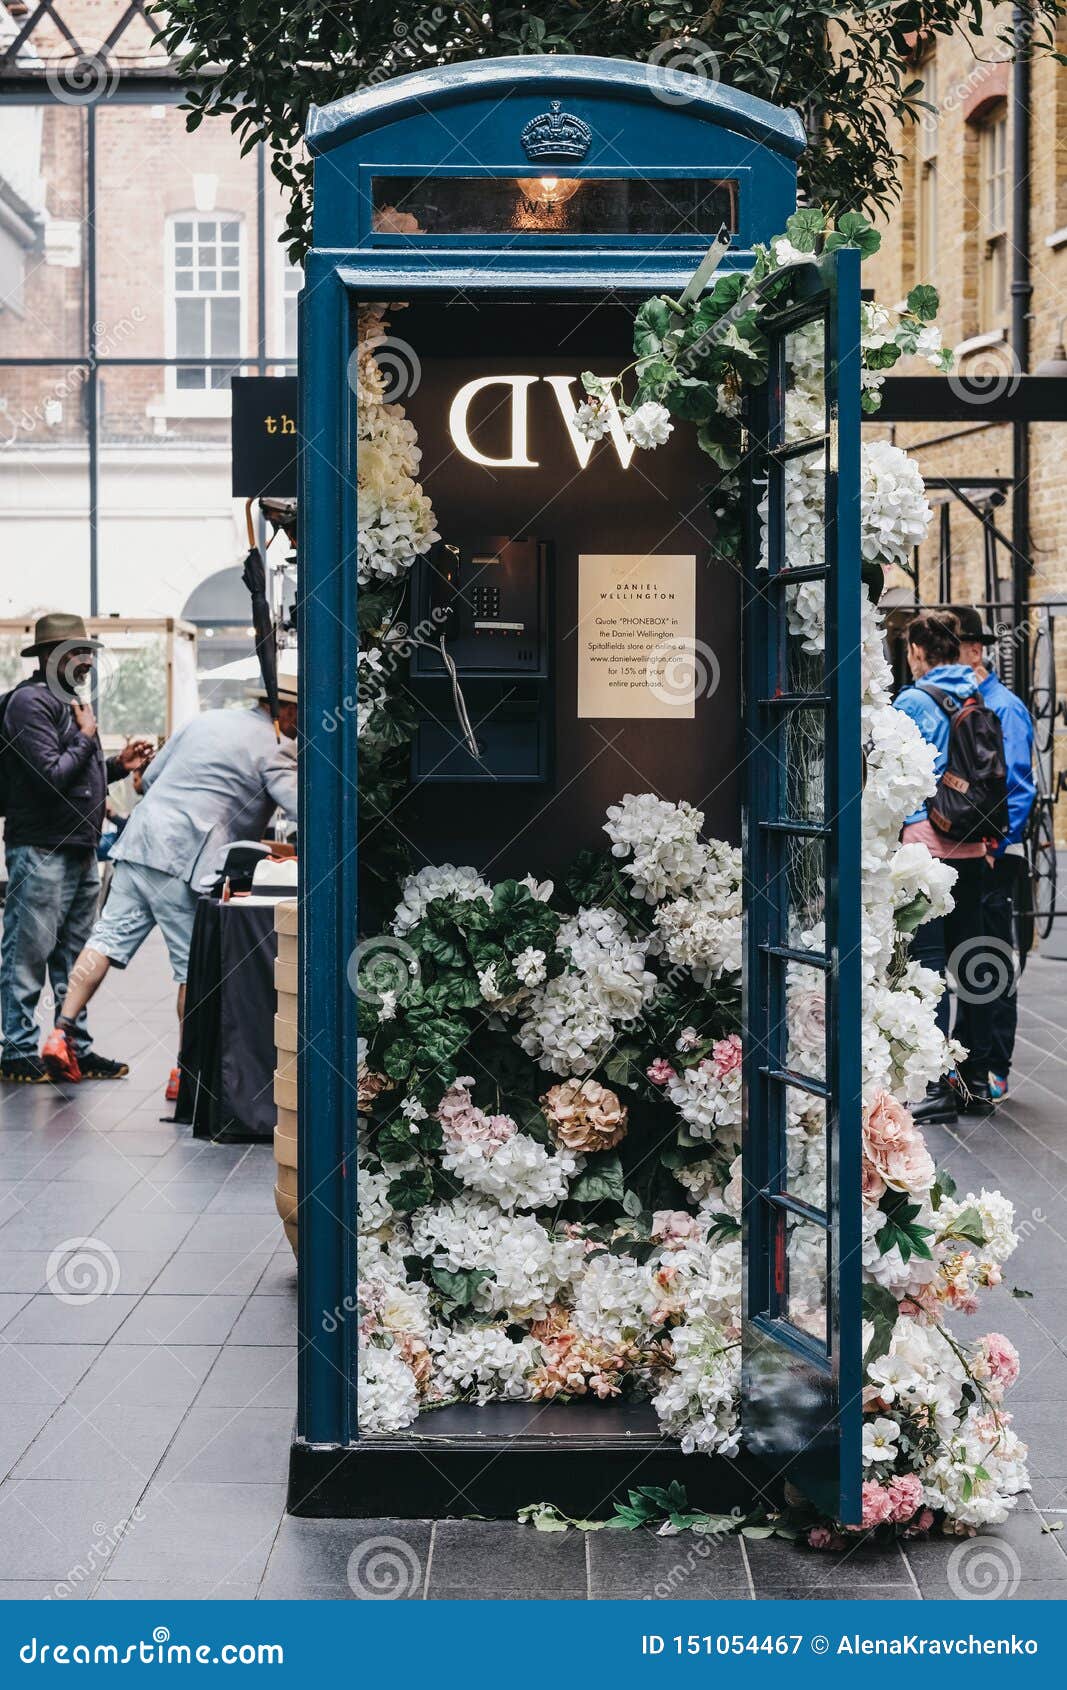 Flower Decorated Phone Booth Sponsored by Inside Spitalfields Market, London, UK Editorial Photography - of city, decor: 151054467